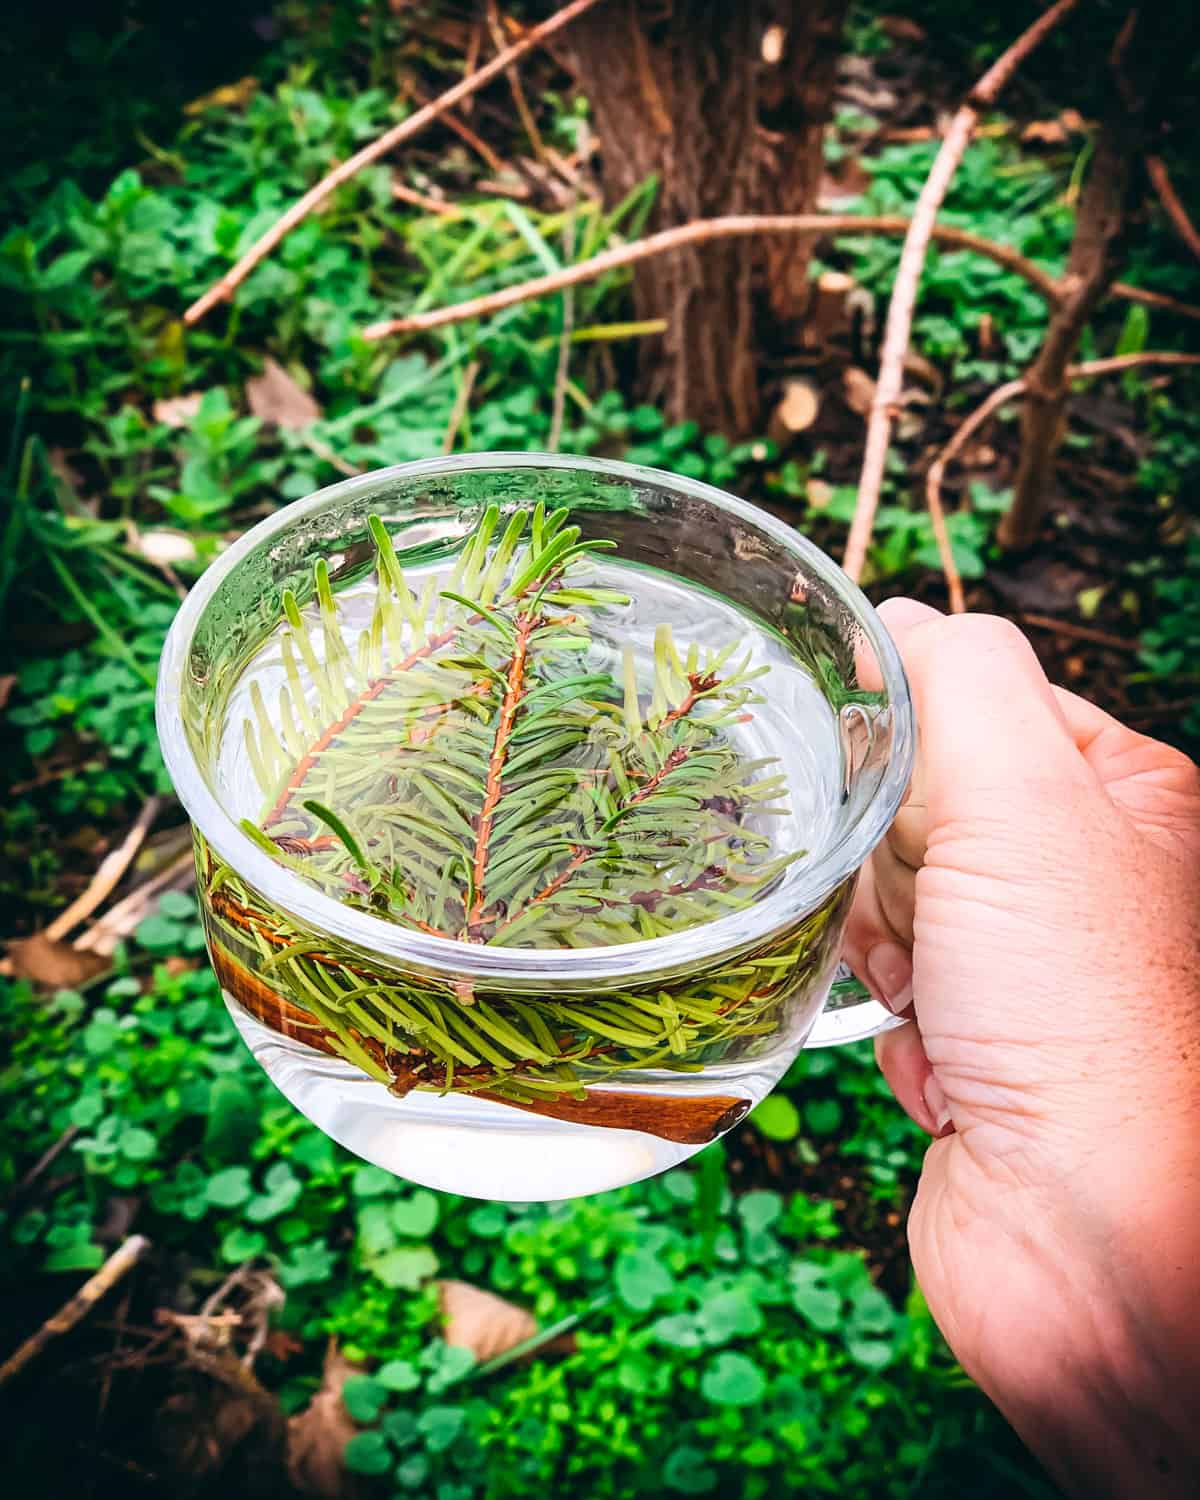 A clear mug in a hand filled with water and fir needle sprigs, and a cinnamon stick at the bottom of the glass. The background is natural green and brown foliage. 